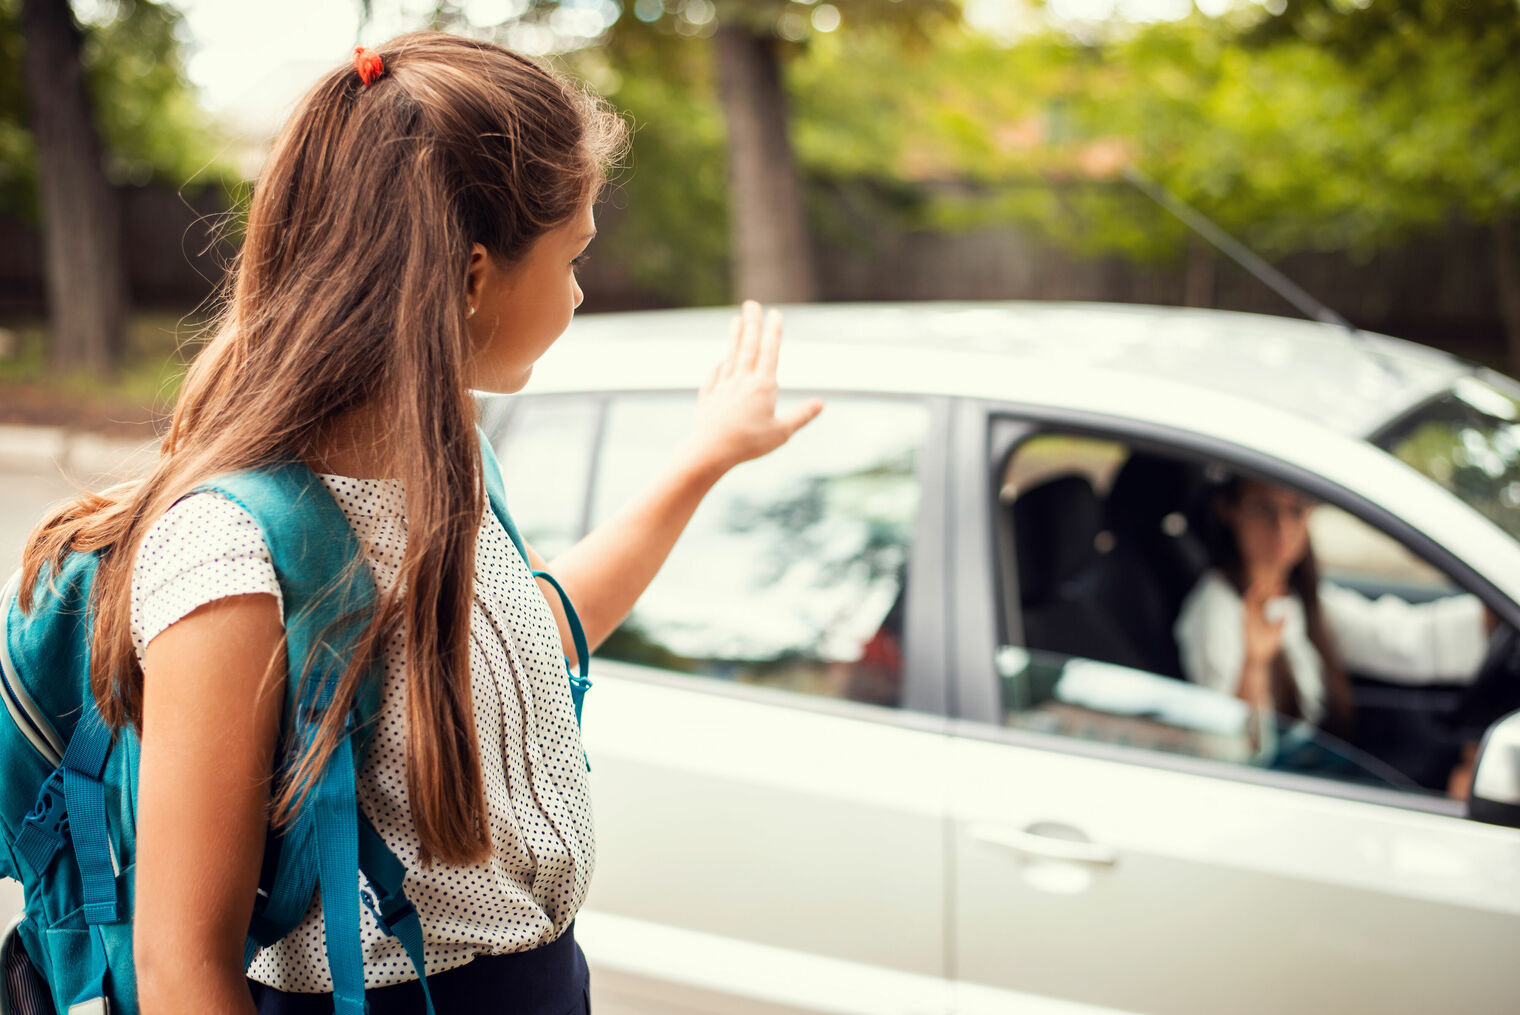 girl with backpack is dropped off at school and waves goodbye to parent in car